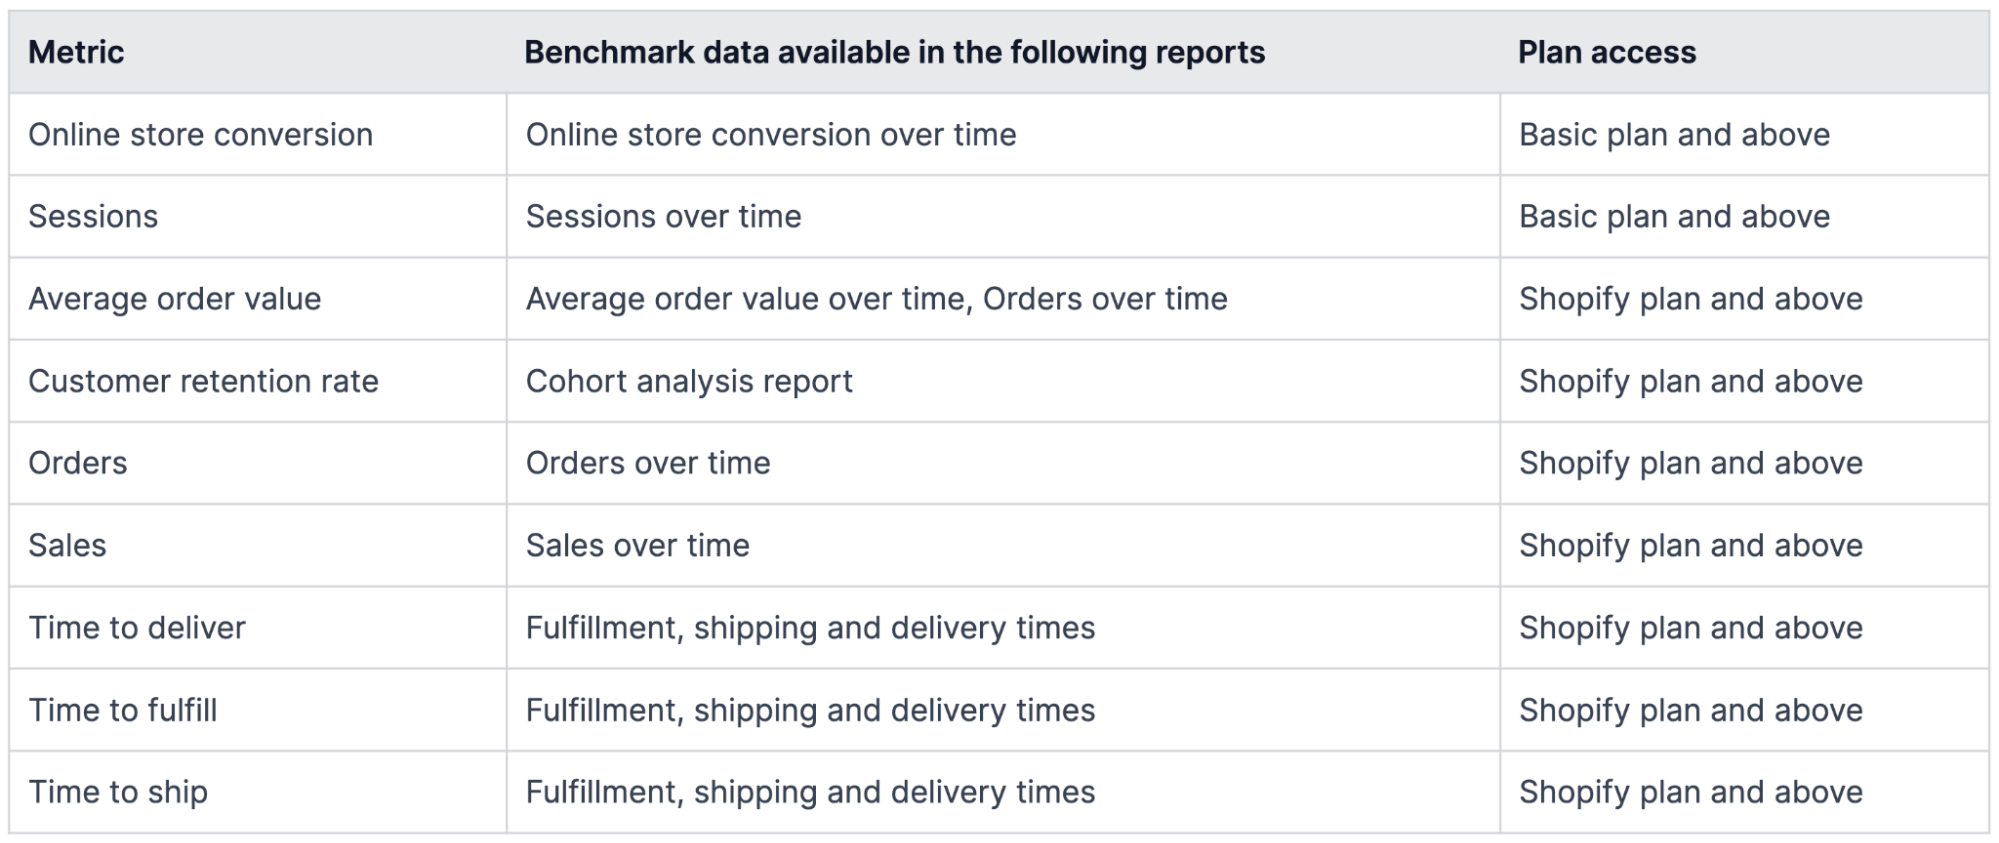 Table listing Shopify reports with benchmark data and the type of Shopify plan required for access.